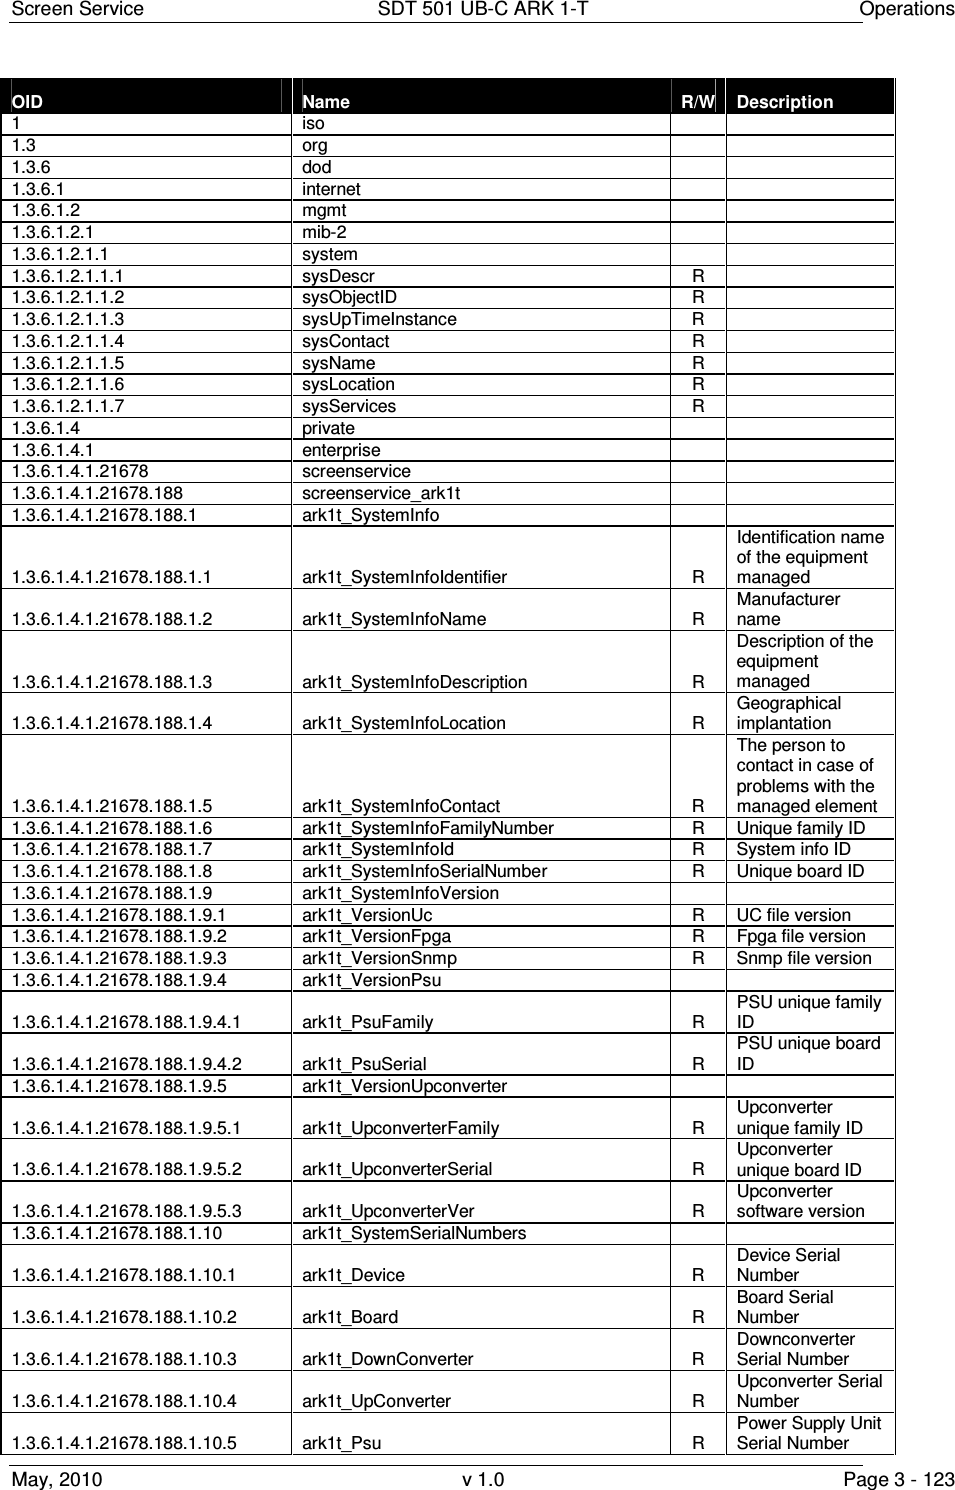 Screen Service  SDT 501 UB-C ARK 1-T  Operations May, 2010  v 1.0  Page 3 - 123 OID  Name  R/W  Description 1  iso      1.3  org      1.3.6  dod      1.3.6.1  internet      1.3.6.1.2  mgmt      1.3.6.1.2.1  mib-2      1.3.6.1.2.1.1  system      1.3.6.1.2.1.1.1  sysDescr  R    1.3.6.1.2.1.1.2  sysObjectID  R    1.3.6.1.2.1.1.3  sysUpTimeInstance  R    1.3.6.1.2.1.1.4  sysContact  R    1.3.6.1.2.1.1.5  sysName  R    1.3.6.1.2.1.1.6  sysLocation  R    1.3.6.1.2.1.1.7  sysServices  R    1.3.6.1.4  private      1.3.6.1.4.1  enterprise      1.3.6.1.4.1.21678  screenservice      1.3.6.1.4.1.21678.188  screenservice_ark1t      1.3.6.1.4.1.21678.188.1  ark1t_SystemInfo      1.3.6.1.4.1.21678.188.1.1  ark1t_SystemInfoIdentifier  R Identification name of the equipment managed 1.3.6.1.4.1.21678.188.1.2  ark1t_SystemInfoName  R Manufacturer  name 1.3.6.1.4.1.21678.188.1.3  ark1t_SystemInfoDescription  R Description of the equipment managed 1.3.6.1.4.1.21678.188.1.4  ark1t_SystemInfoLocation  R Geographical implantation 1.3.6.1.4.1.21678.188.1.5  ark1t_SystemInfoContact  R The person to contact in case of problems with the managed element 1.3.6.1.4.1.21678.188.1.6  ark1t_SystemInfoFamilyNumber  R  Unique family ID 1.3.6.1.4.1.21678.188.1.7  ark1t_SystemInfoId  R  System info ID 1.3.6.1.4.1.21678.188.1.8  ark1t_SystemInfoSerialNumber  R  Unique board ID 1.3.6.1.4.1.21678.188.1.9  ark1t_SystemInfoVersion      1.3.6.1.4.1.21678.188.1.9.1  ark1t_VersionUc  R  UC file version 1.3.6.1.4.1.21678.188.1.9.2  ark1t_VersionFpga  R  Fpga file version 1.3.6.1.4.1.21678.188.1.9.3  ark1t_VersionSnmp  R  Snmp file version 1.3.6.1.4.1.21678.188.1.9.4  ark1t_VersionPsu      1.3.6.1.4.1.21678.188.1.9.4.1  ark1t_PsuFamily  R PSU unique family ID 1.3.6.1.4.1.21678.188.1.9.4.2  ark1t_PsuSerial  R PSU unique board ID 1.3.6.1.4.1.21678.188.1.9.5  ark1t_VersionUpconverter      1.3.6.1.4.1.21678.188.1.9.5.1  ark1t_UpconverterFamily  R Upconverter unique family ID 1.3.6.1.4.1.21678.188.1.9.5.2  ark1t_UpconverterSerial  R Upconverter unique board ID 1.3.6.1.4.1.21678.188.1.9.5.3  ark1t_UpconverterVer  R Upconverter software version 1.3.6.1.4.1.21678.188.1.10  ark1t_SystemSerialNumbers      1.3.6.1.4.1.21678.188.1.10.1  ark1t_Device  R Device Serial Number 1.3.6.1.4.1.21678.188.1.10.2  ark1t_Board  R Board Serial Number 1.3.6.1.4.1.21678.188.1.10.3  ark1t_DownConverter  R Downconverter Serial Number 1.3.6.1.4.1.21678.188.1.10.4  ark1t_UpConverter  R Upconverter Serial Number 1.3.6.1.4.1.21678.188.1.10.5  ark1t_Psu  R Power Supply Unit Serial Number 